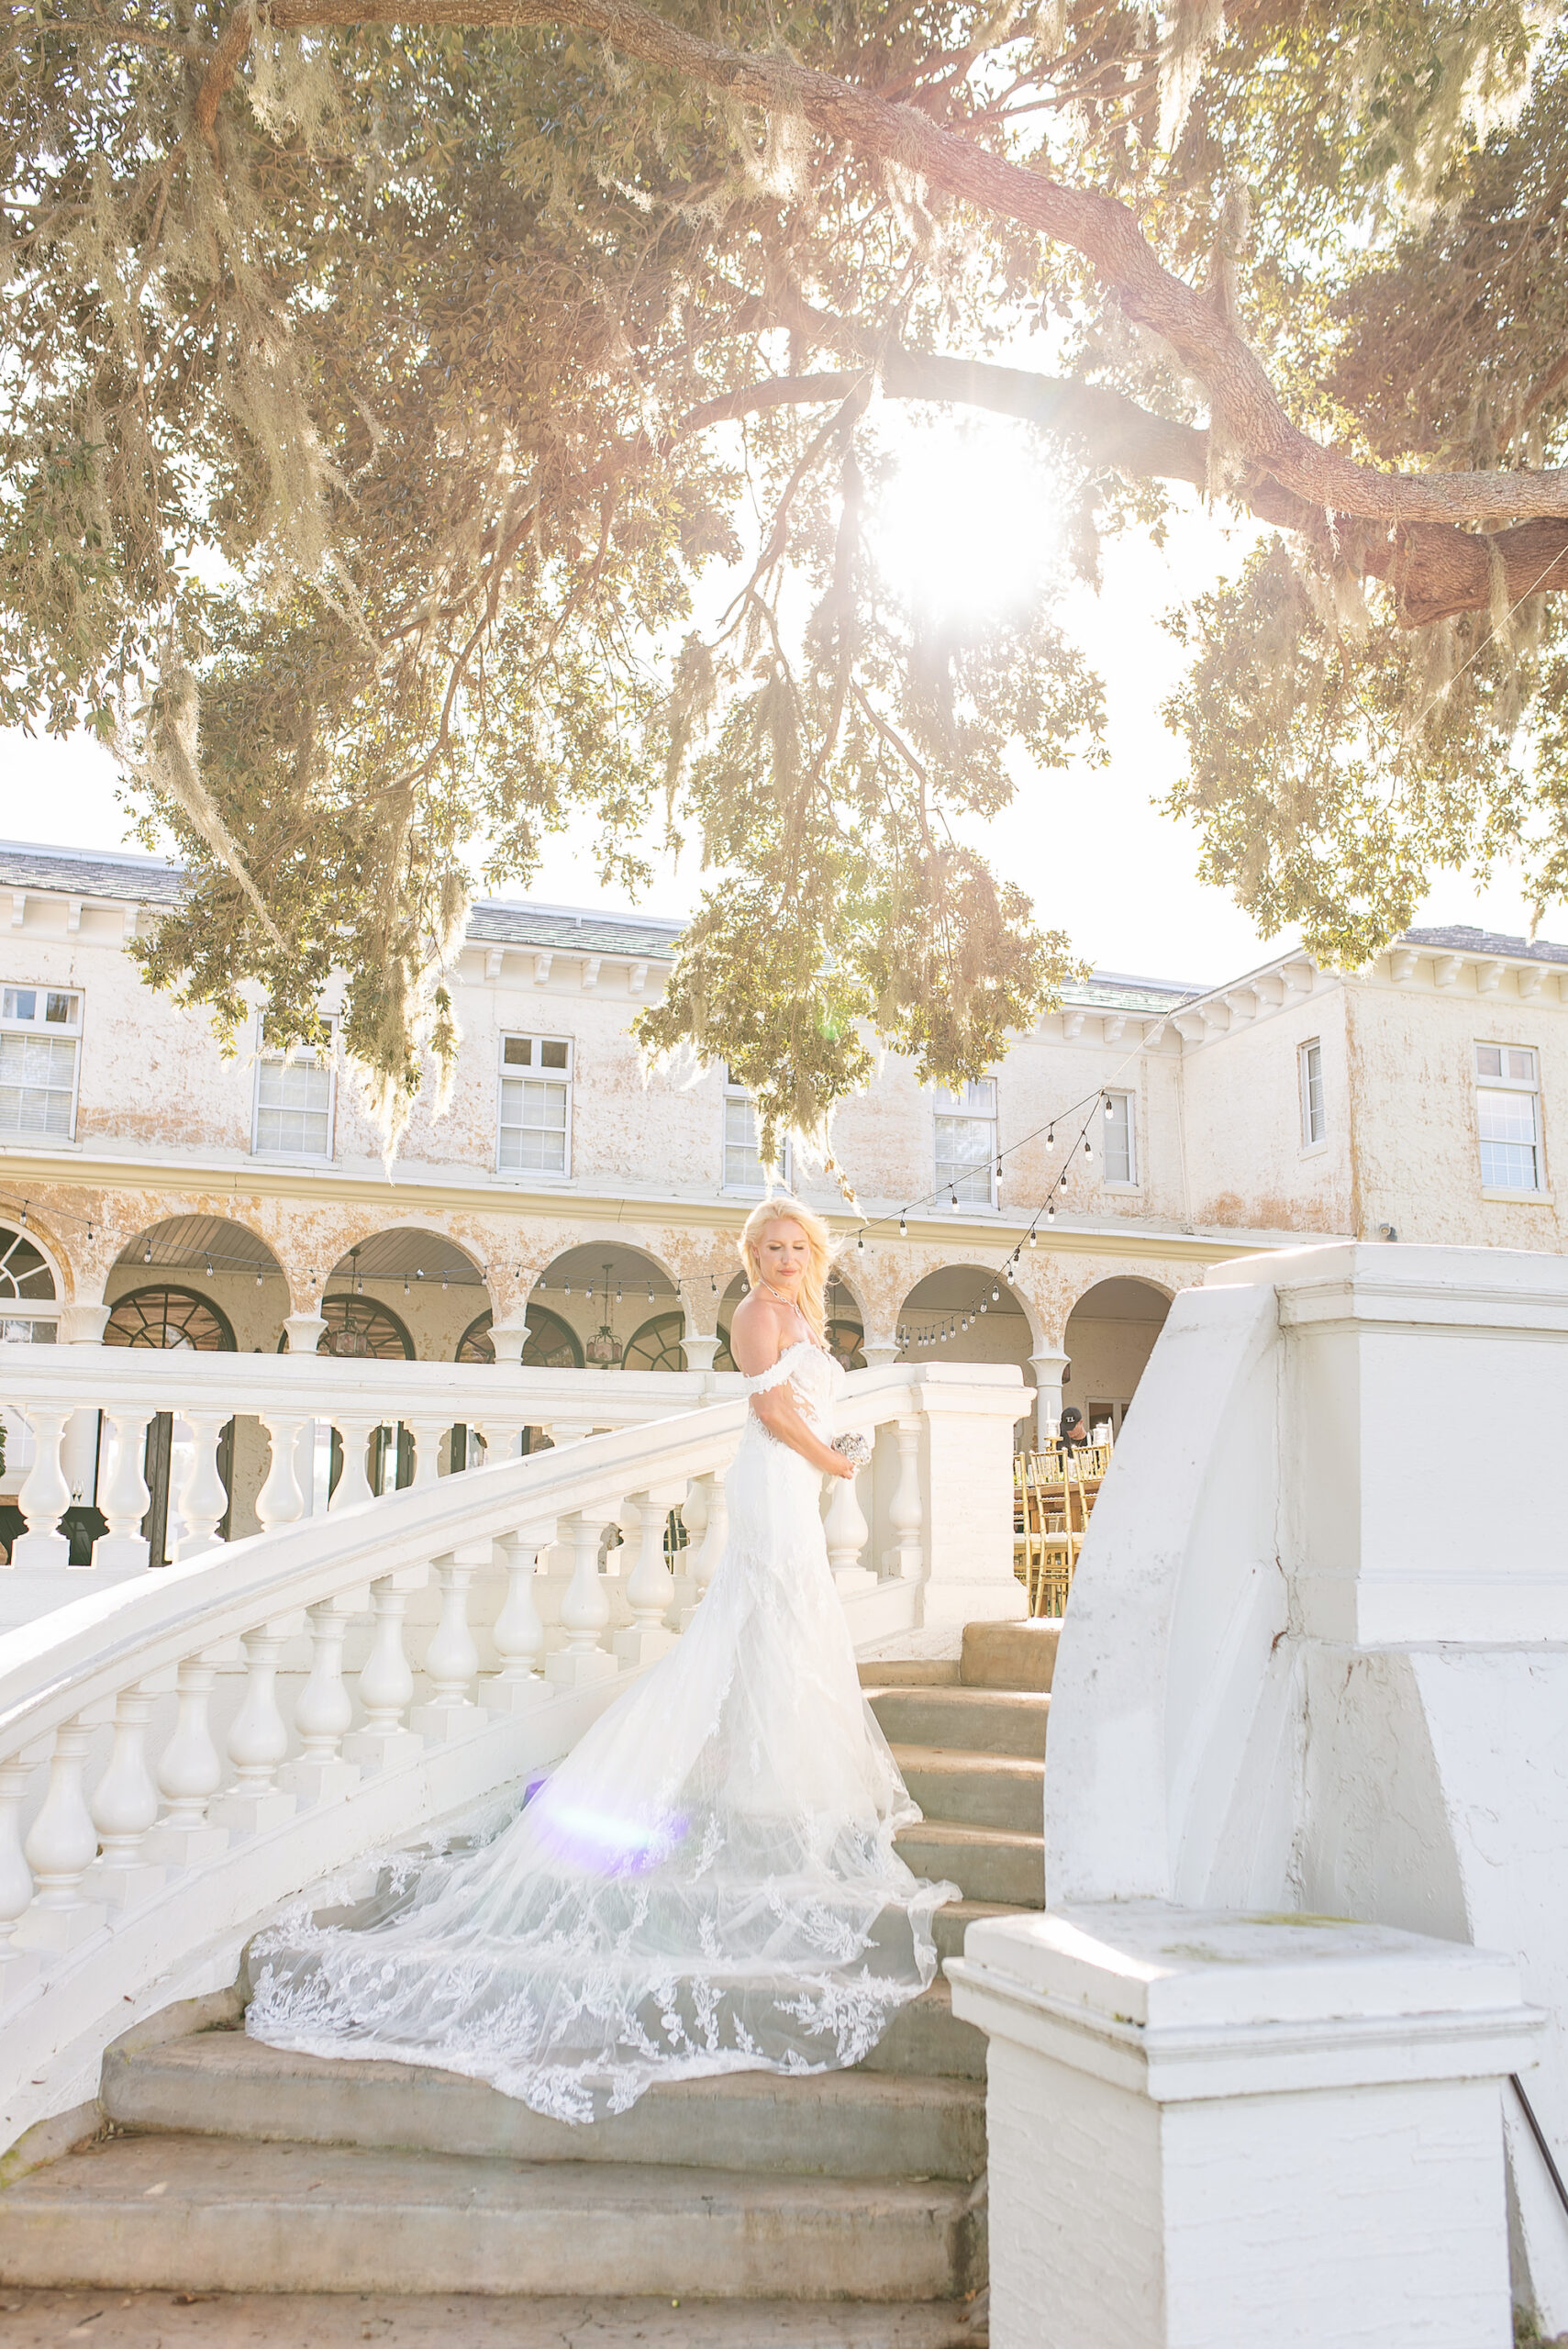 Outdoor Bridal Wedding Portrait on Stairs at Italian Inspired Setting in Central Florida | Venue Bella Cosa | Tampa Bay Wedding Photographer Kristen Marie Photography